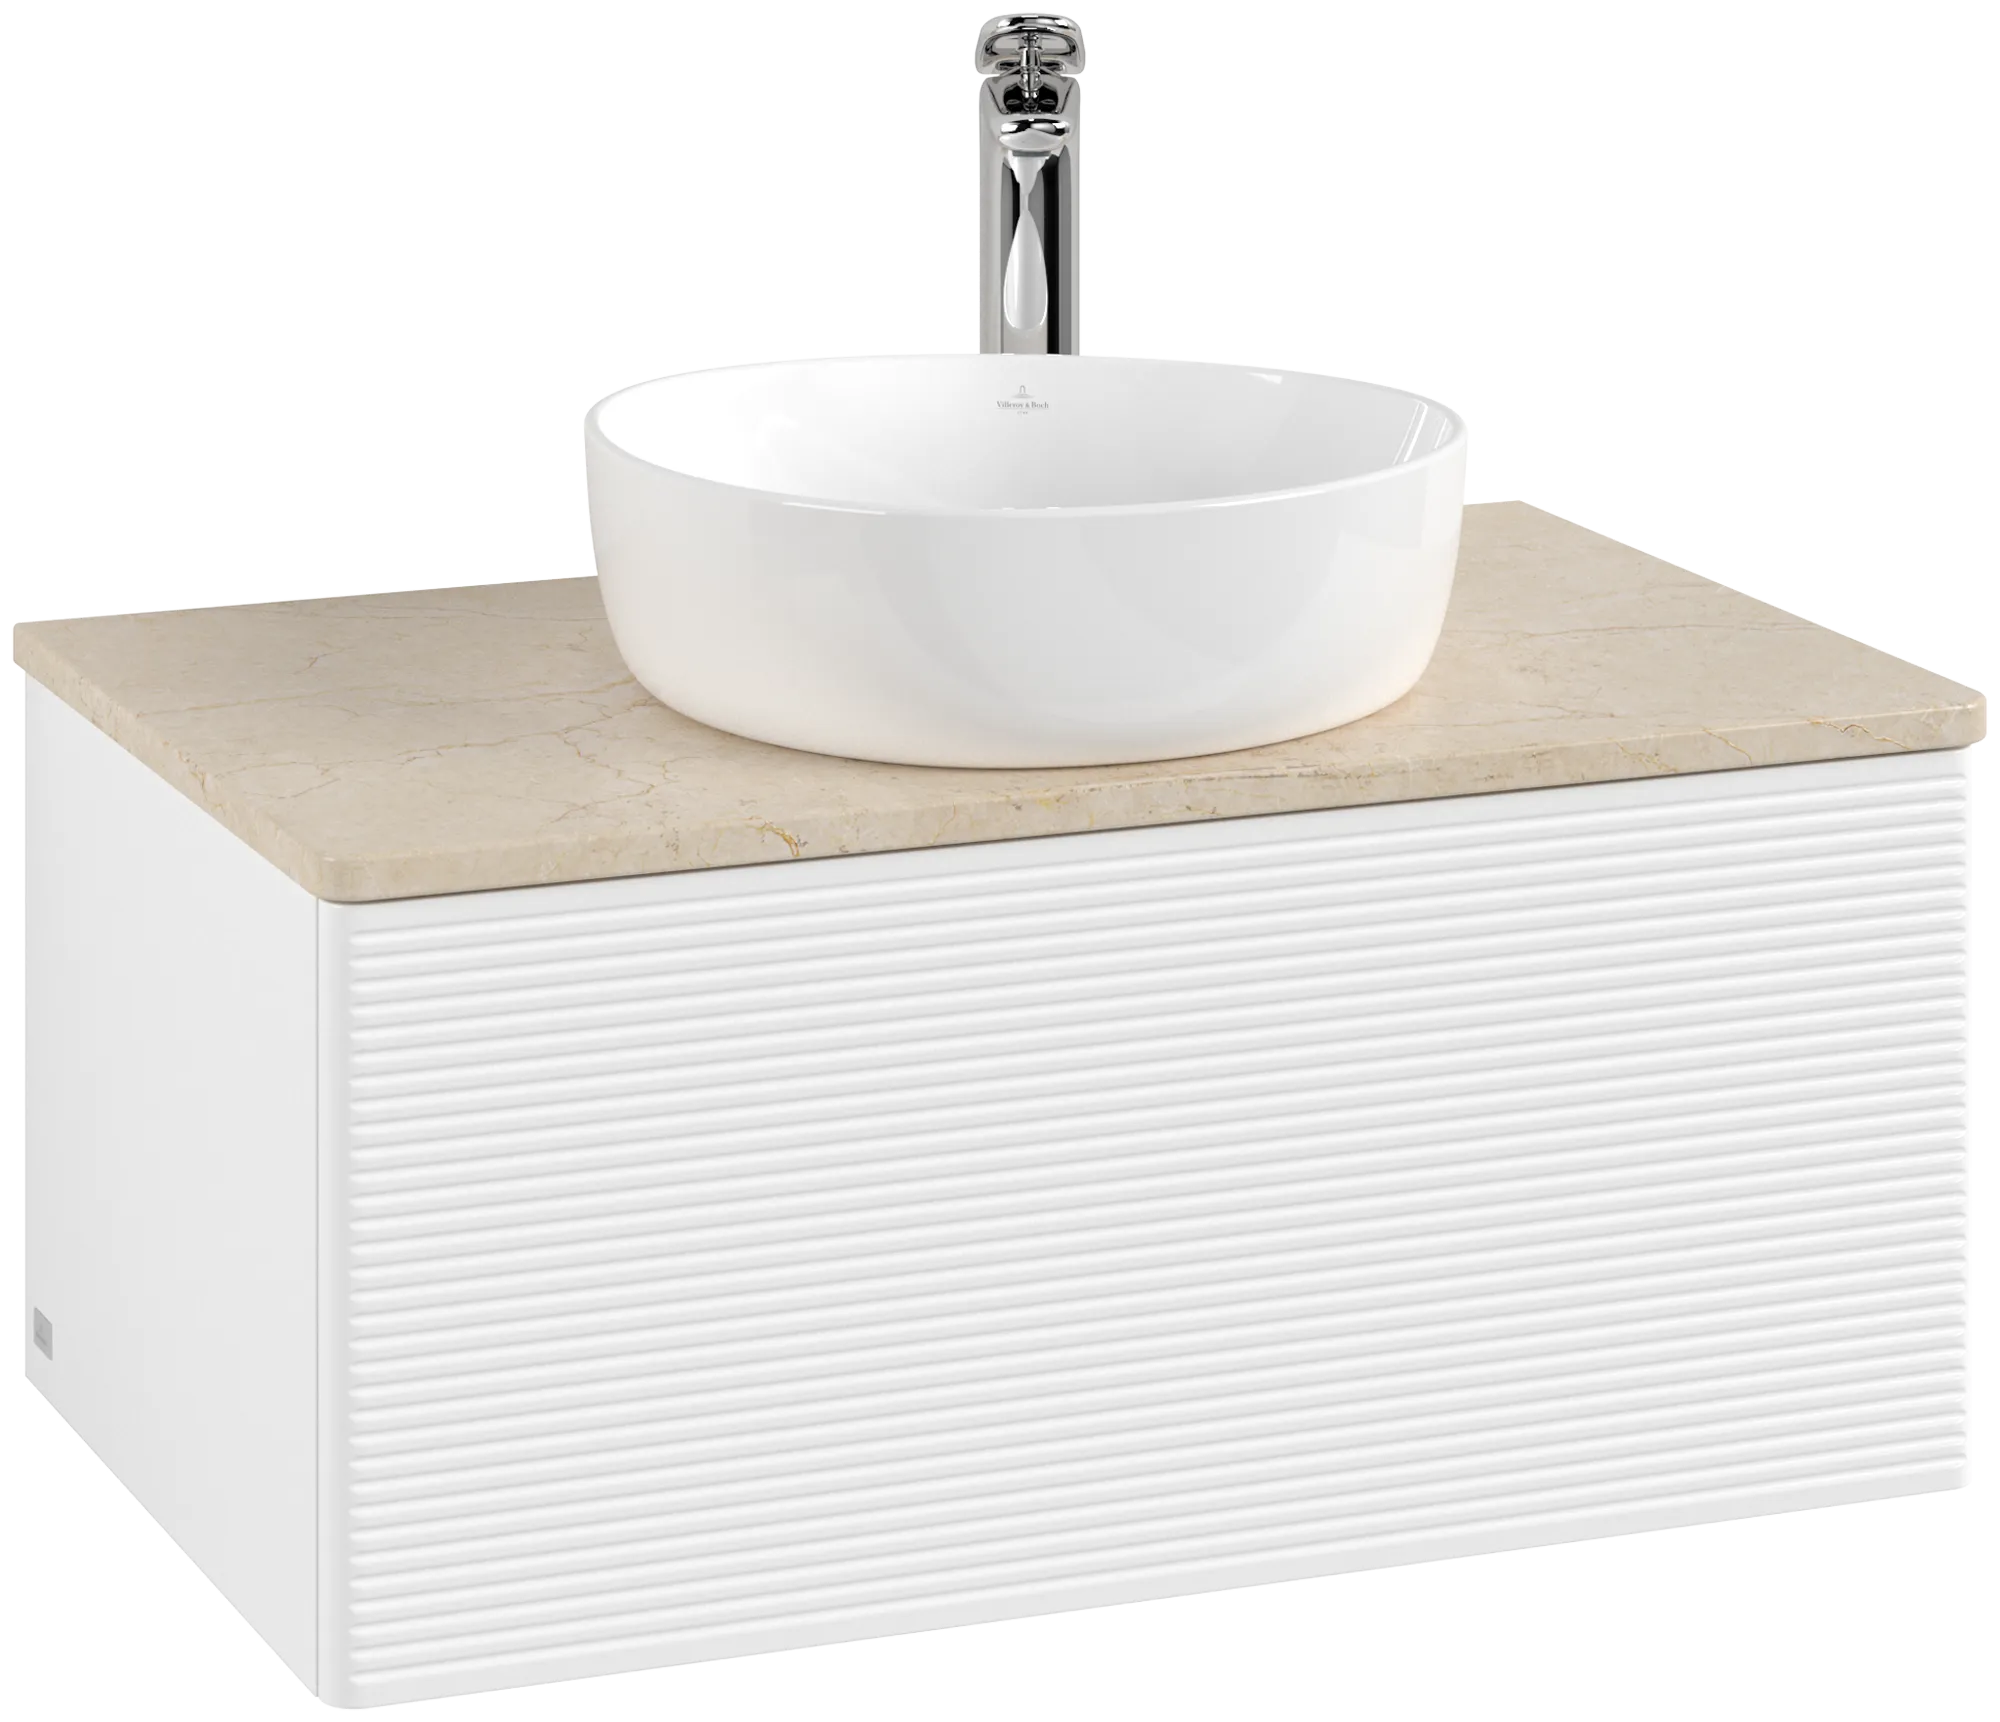 Picture of VILLEROY BOCH Antao Vanity unit, with lighting, 1 pull-out compartment, 800 x 360 x 500 mm, Front with grain texture, White Matt Lacquer / Botticino #L30153MT